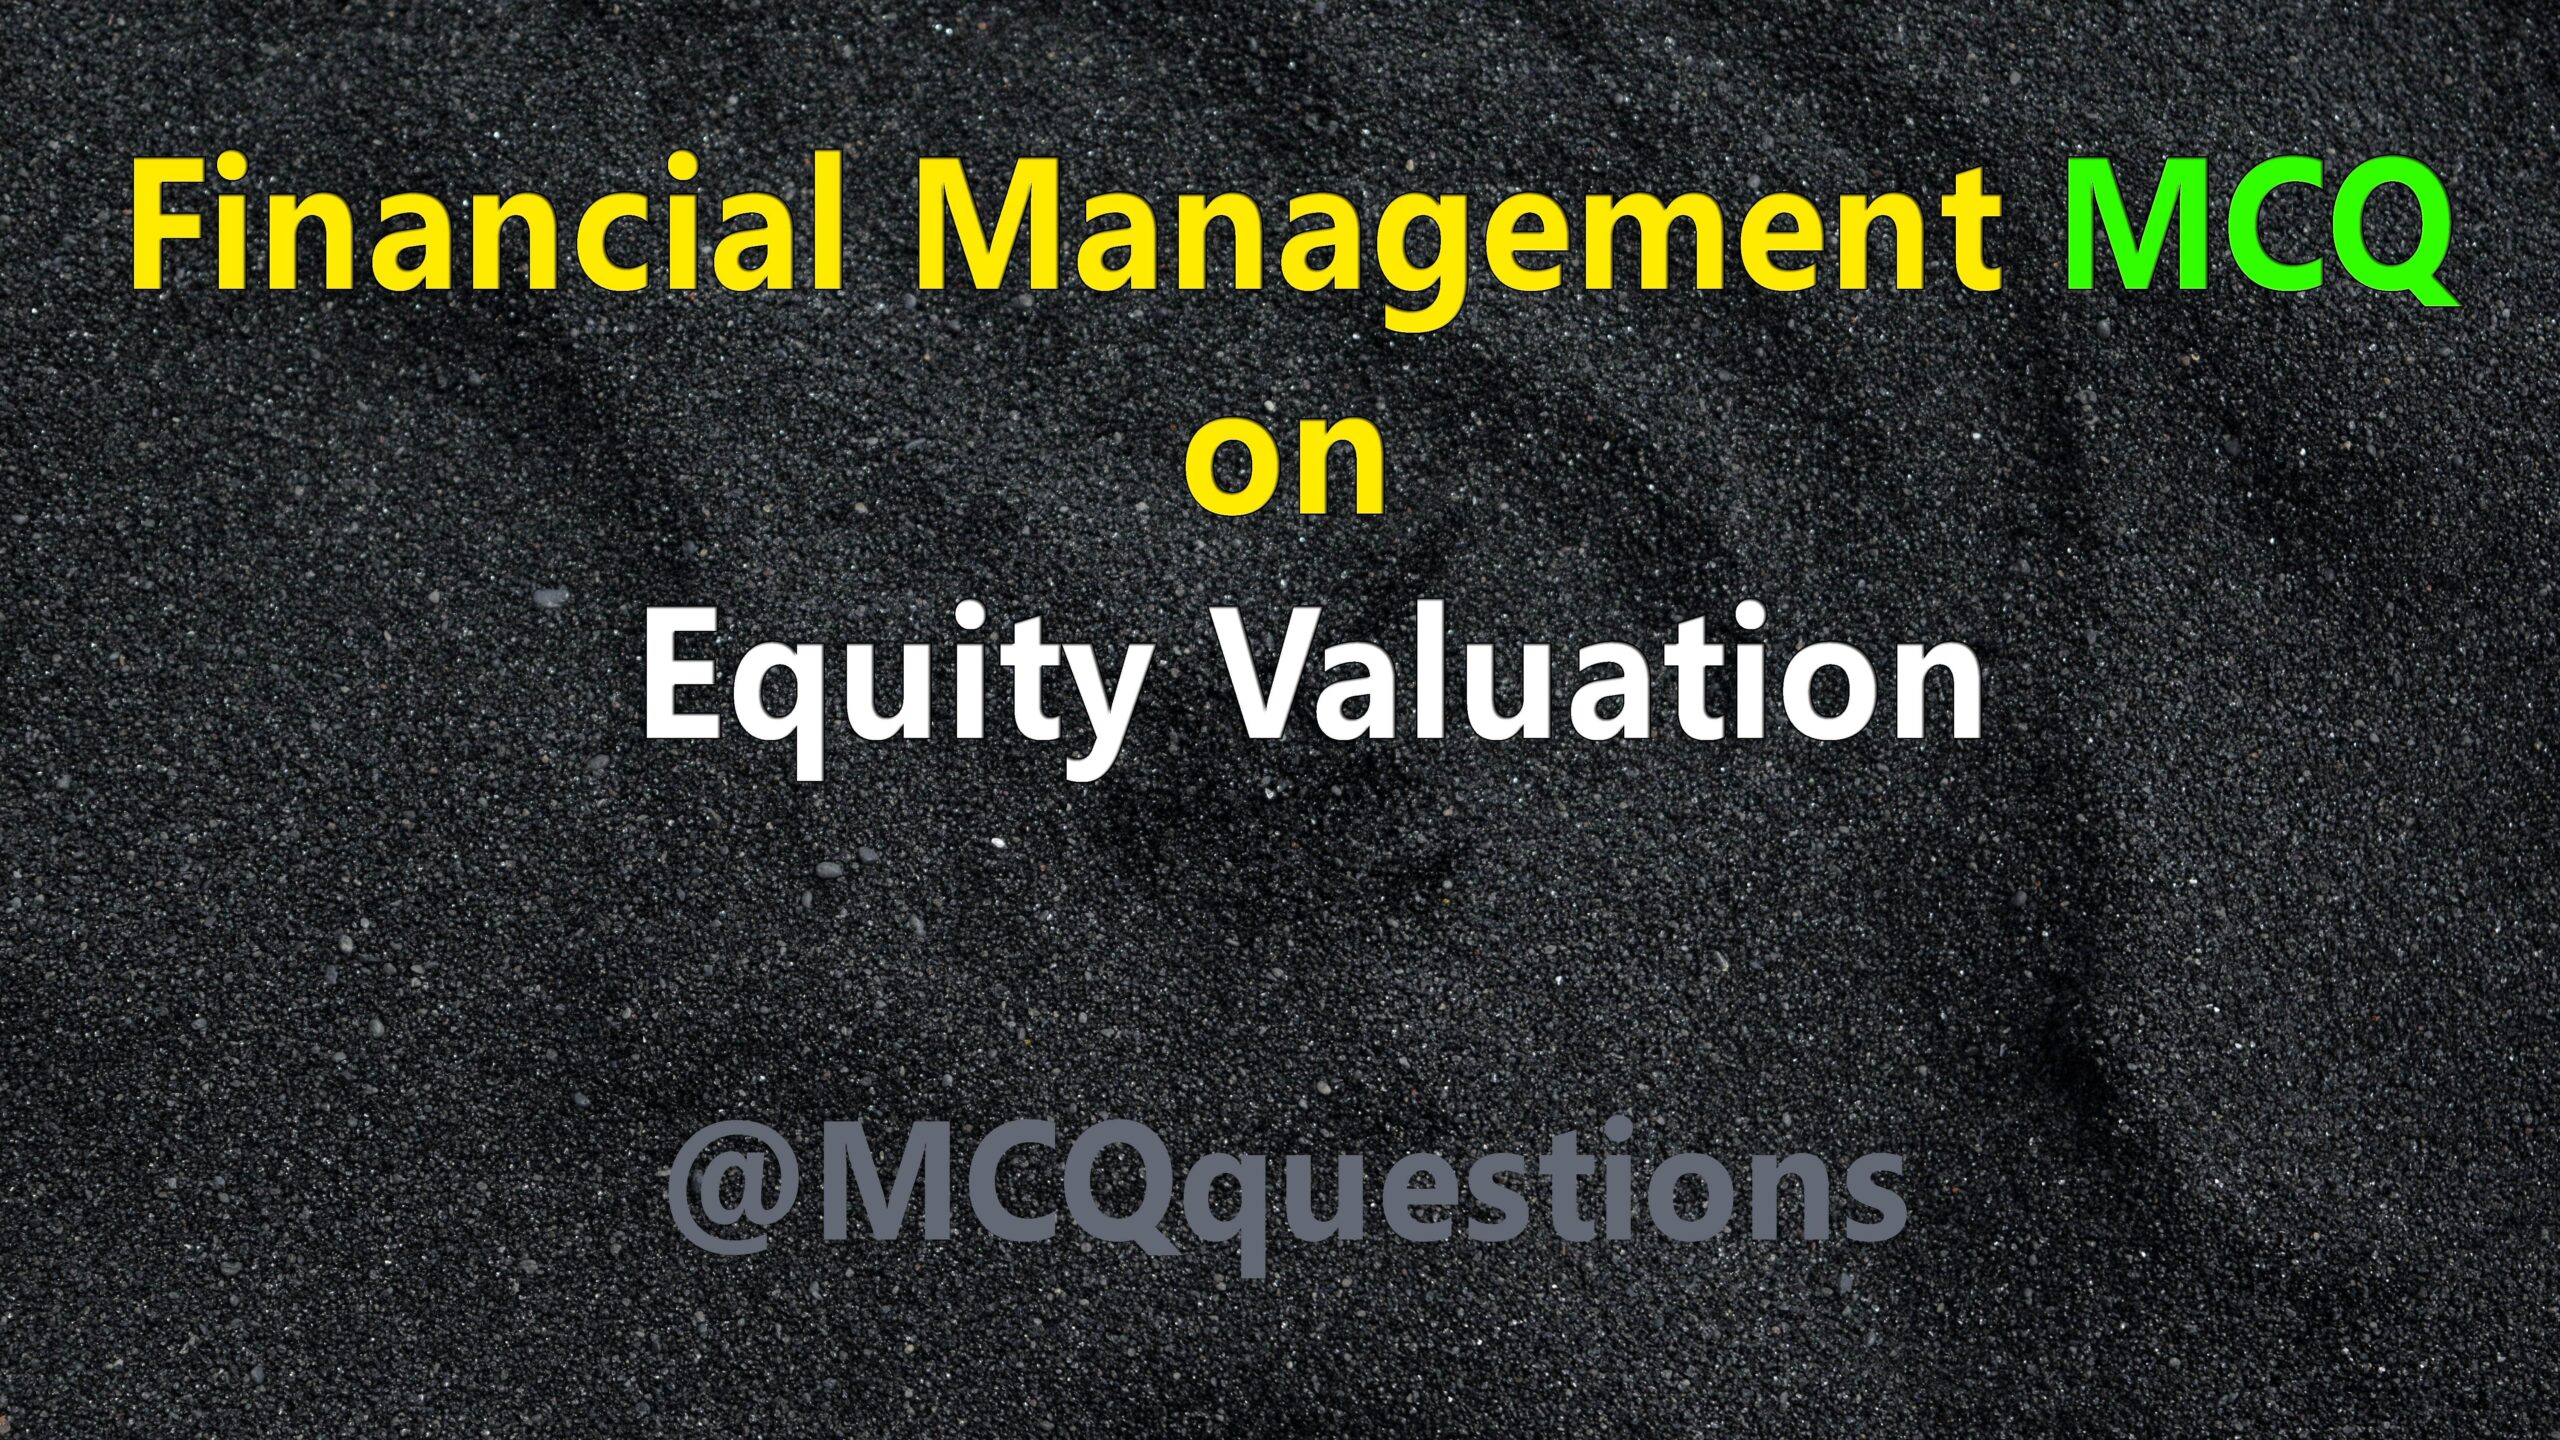 Financial Management MCQ on Equity Valuation